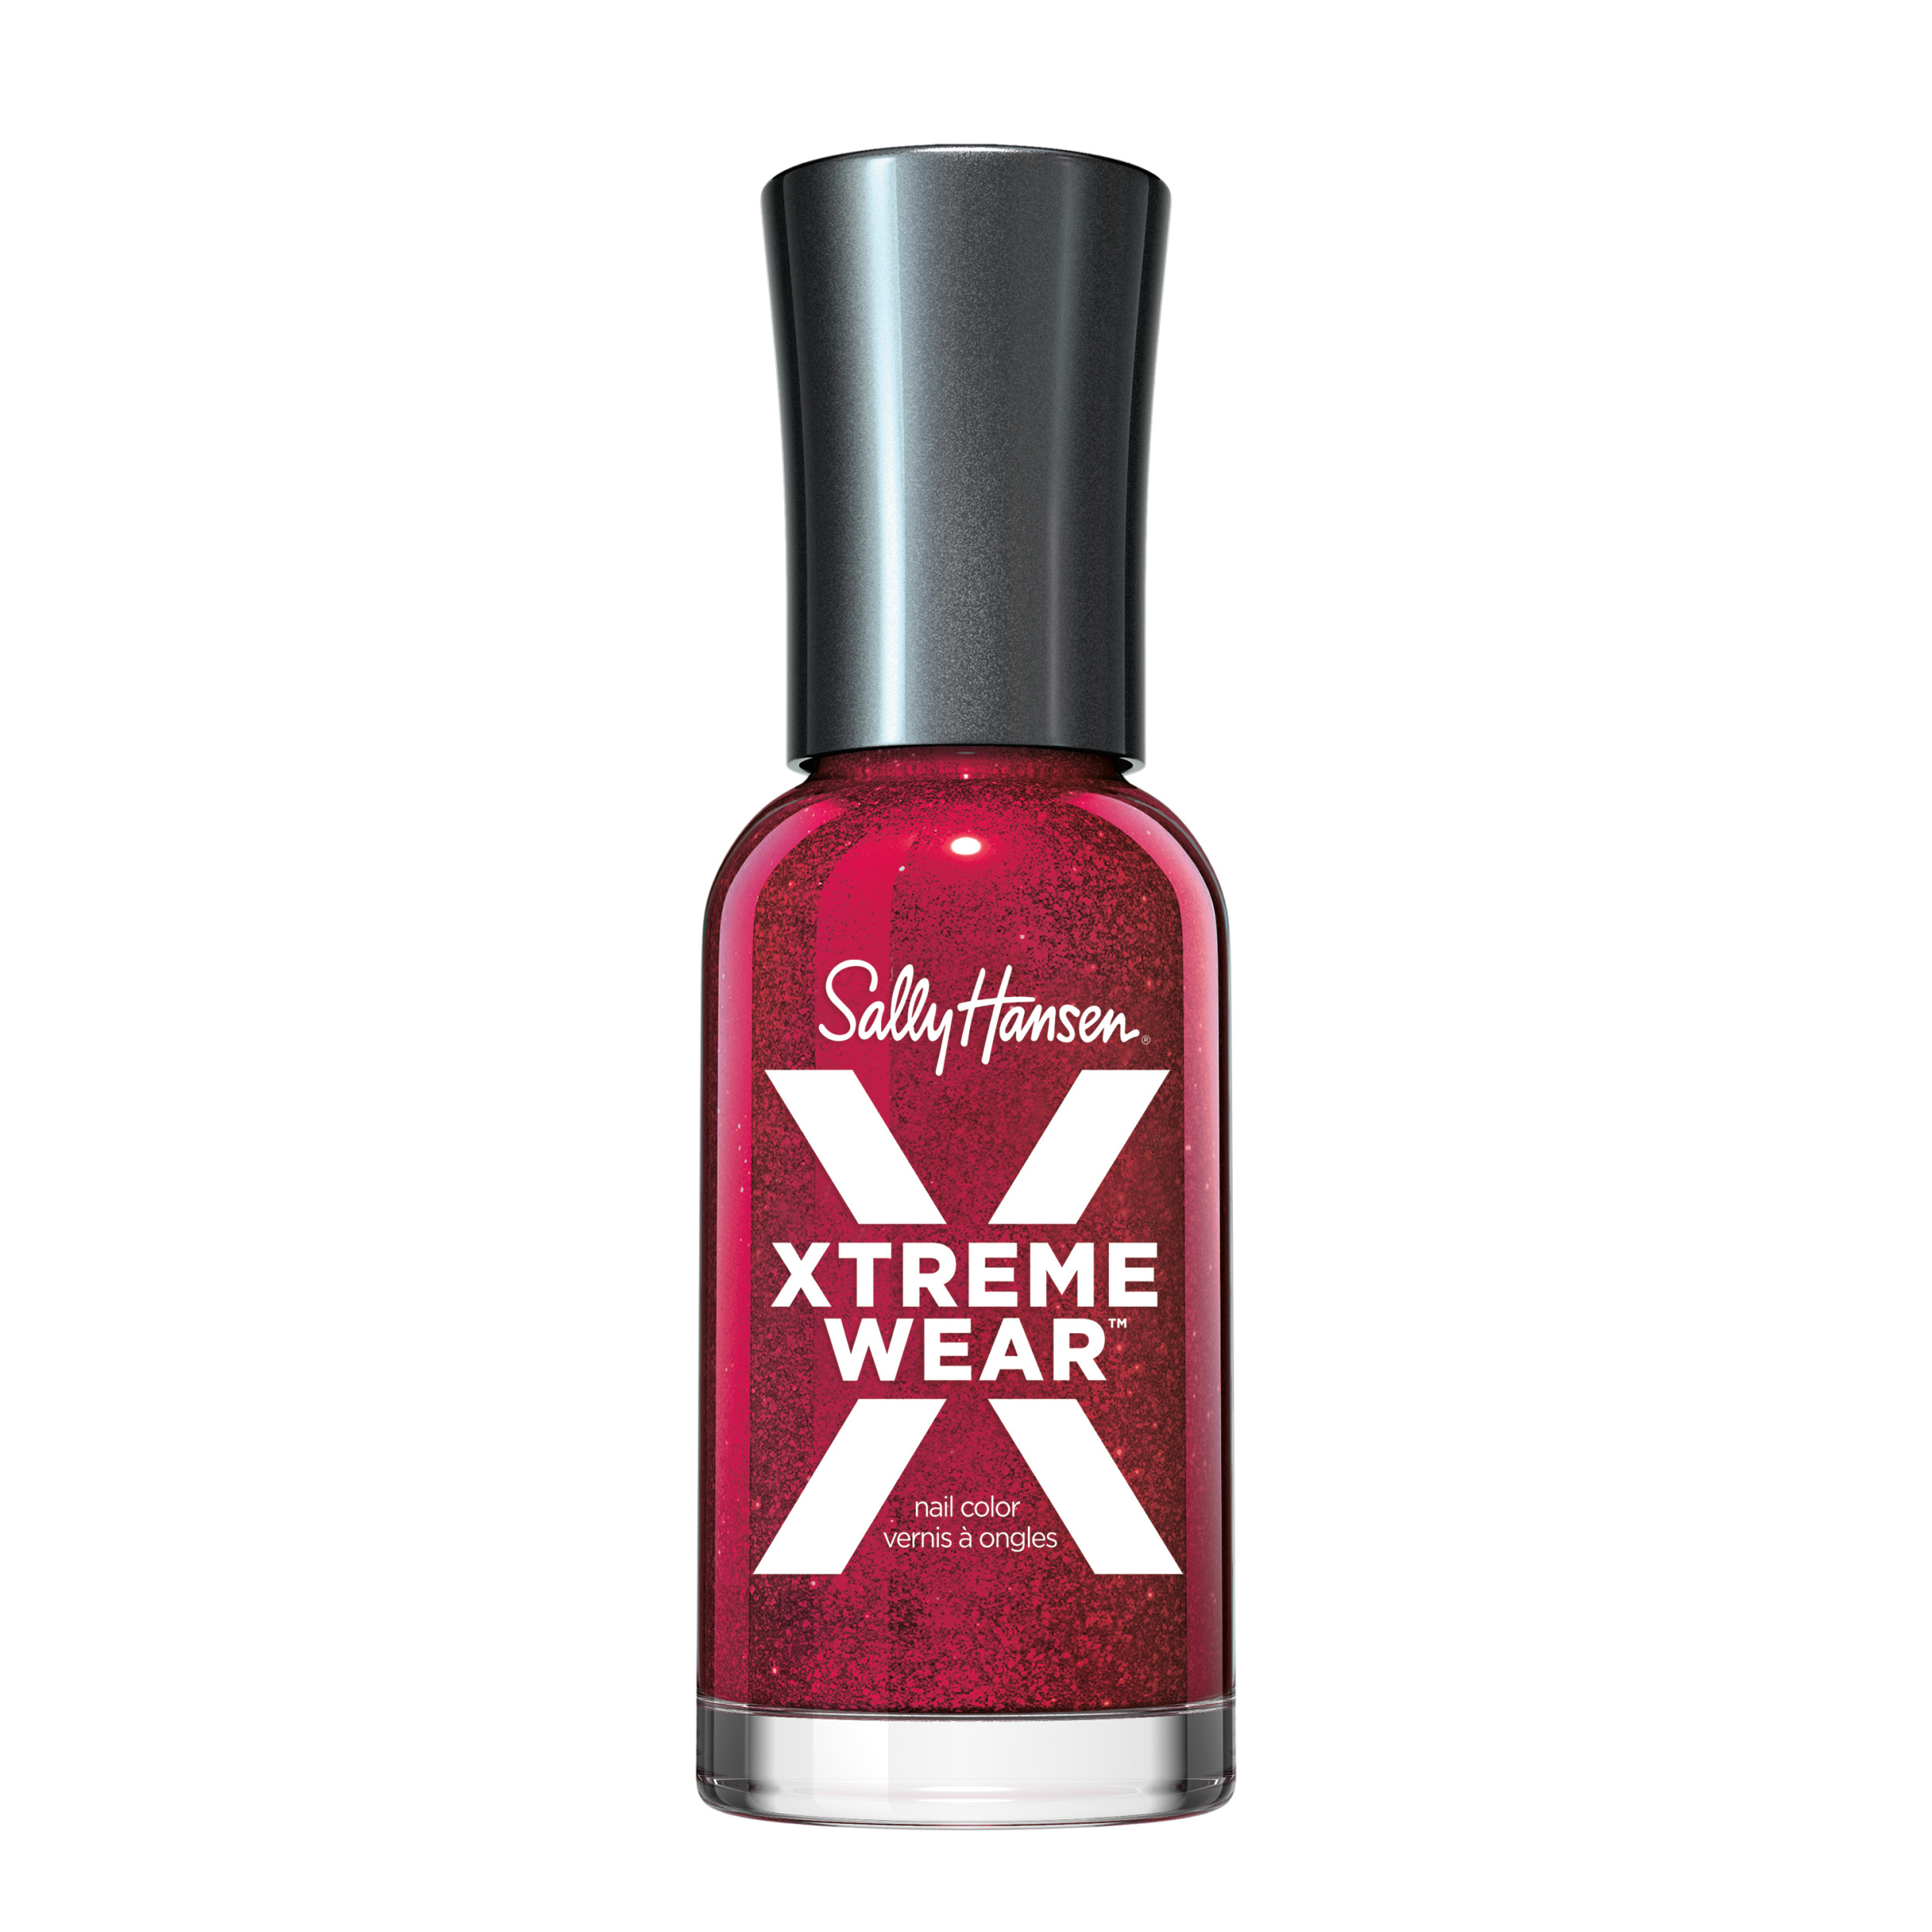 Sally Hansen Xtreme Wear Nail Polish, Red Carpet, 0.4 oz, Chip Resistant, Bold Color - image 1 of 14